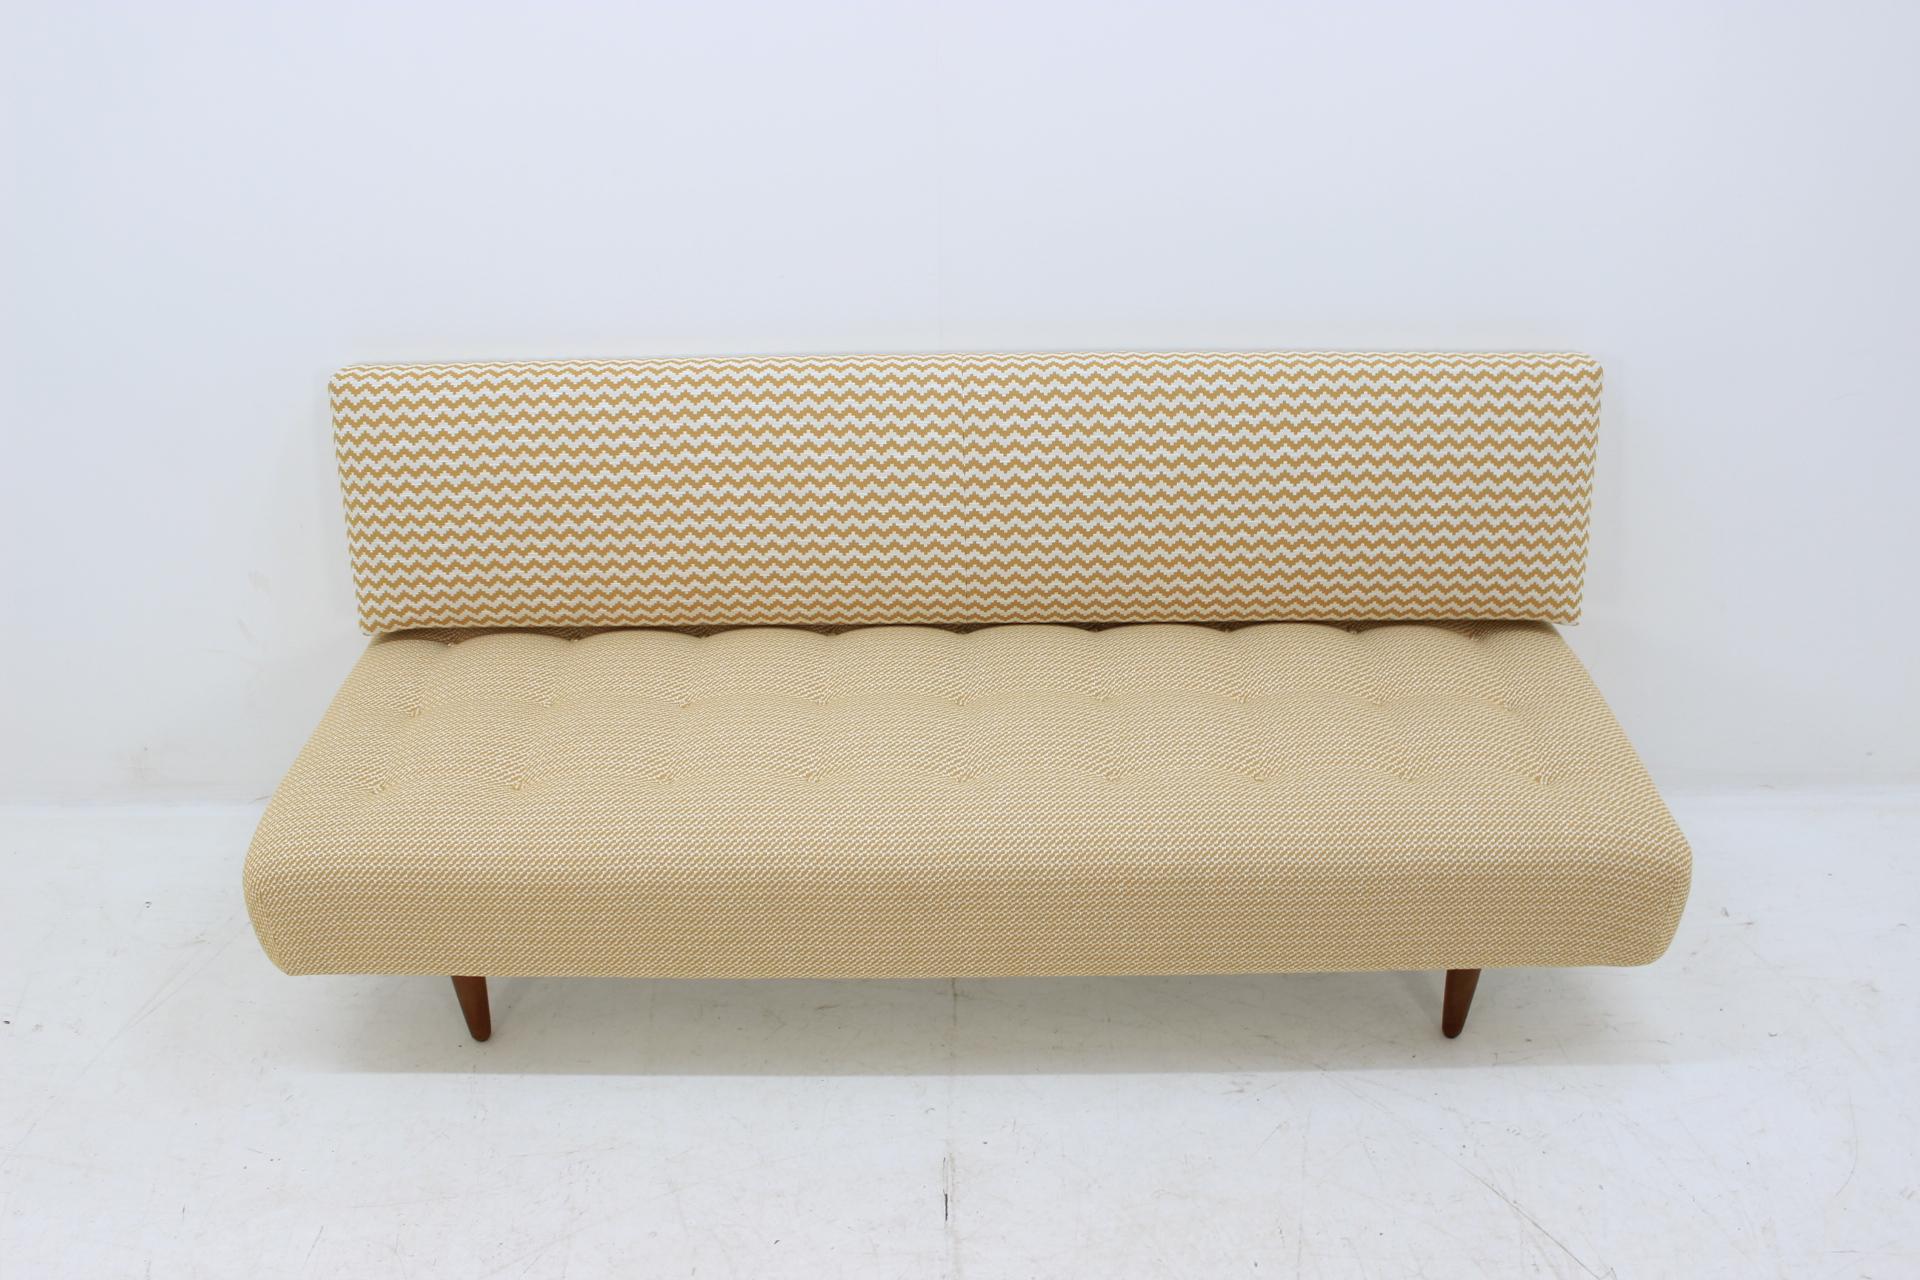 Can be easy used as a sofa or bed.
Newly upholstered and re-polished oak legs. Very good condition